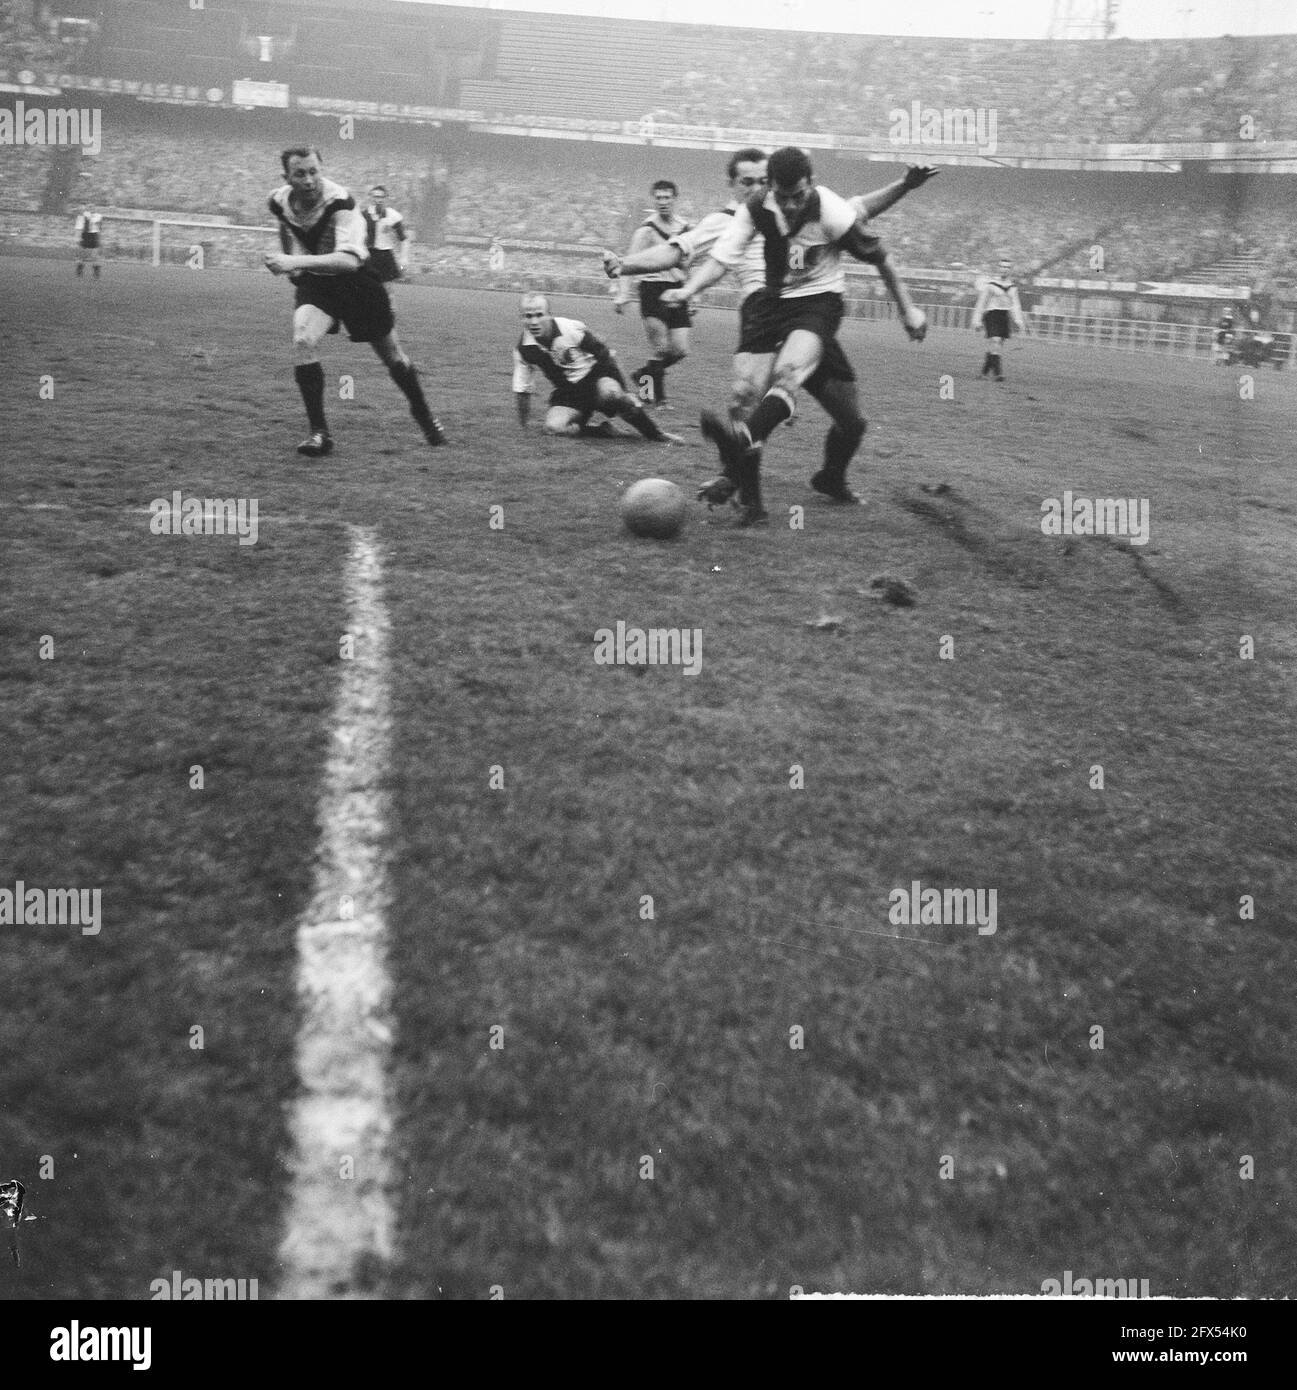 Feyenoord against DOS 4-3, Coen Moulijn in action, November 27, 1960, sports, soccer, The Netherlands, 20th century press agency photo, news to remember, documentary, historic photography 1945-1990, visual stories, human history of the Twentieth Century, capturing moments in time Stock Photo